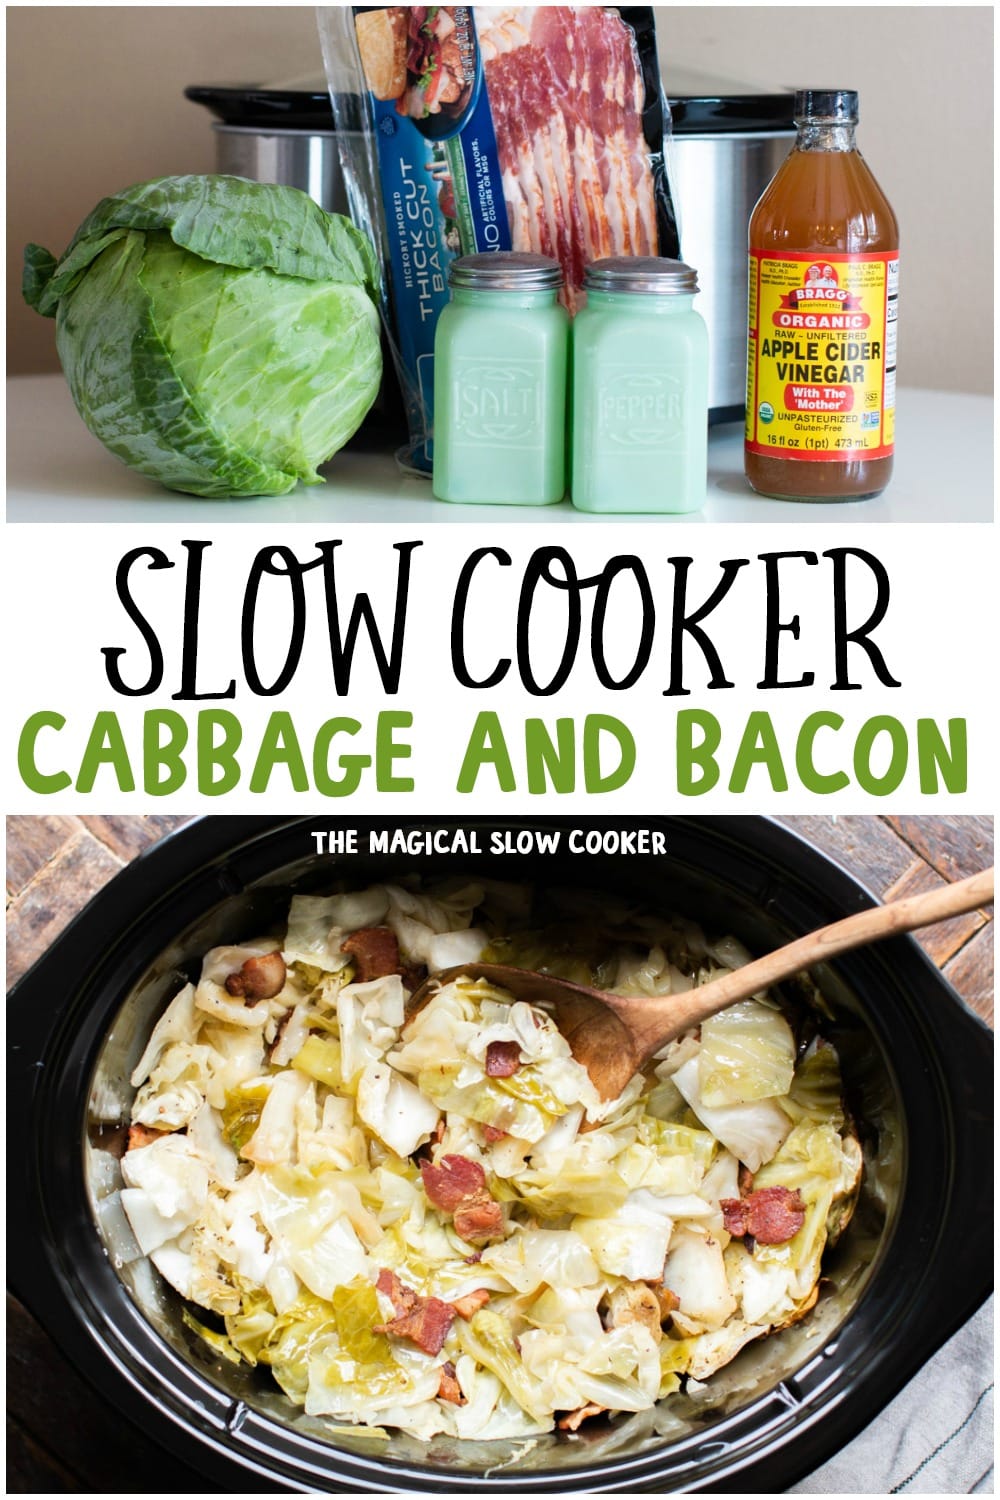 2 photo collage of slow cooker cabbage with text overlay that says: Slow Cooker Cabbage and Bacon